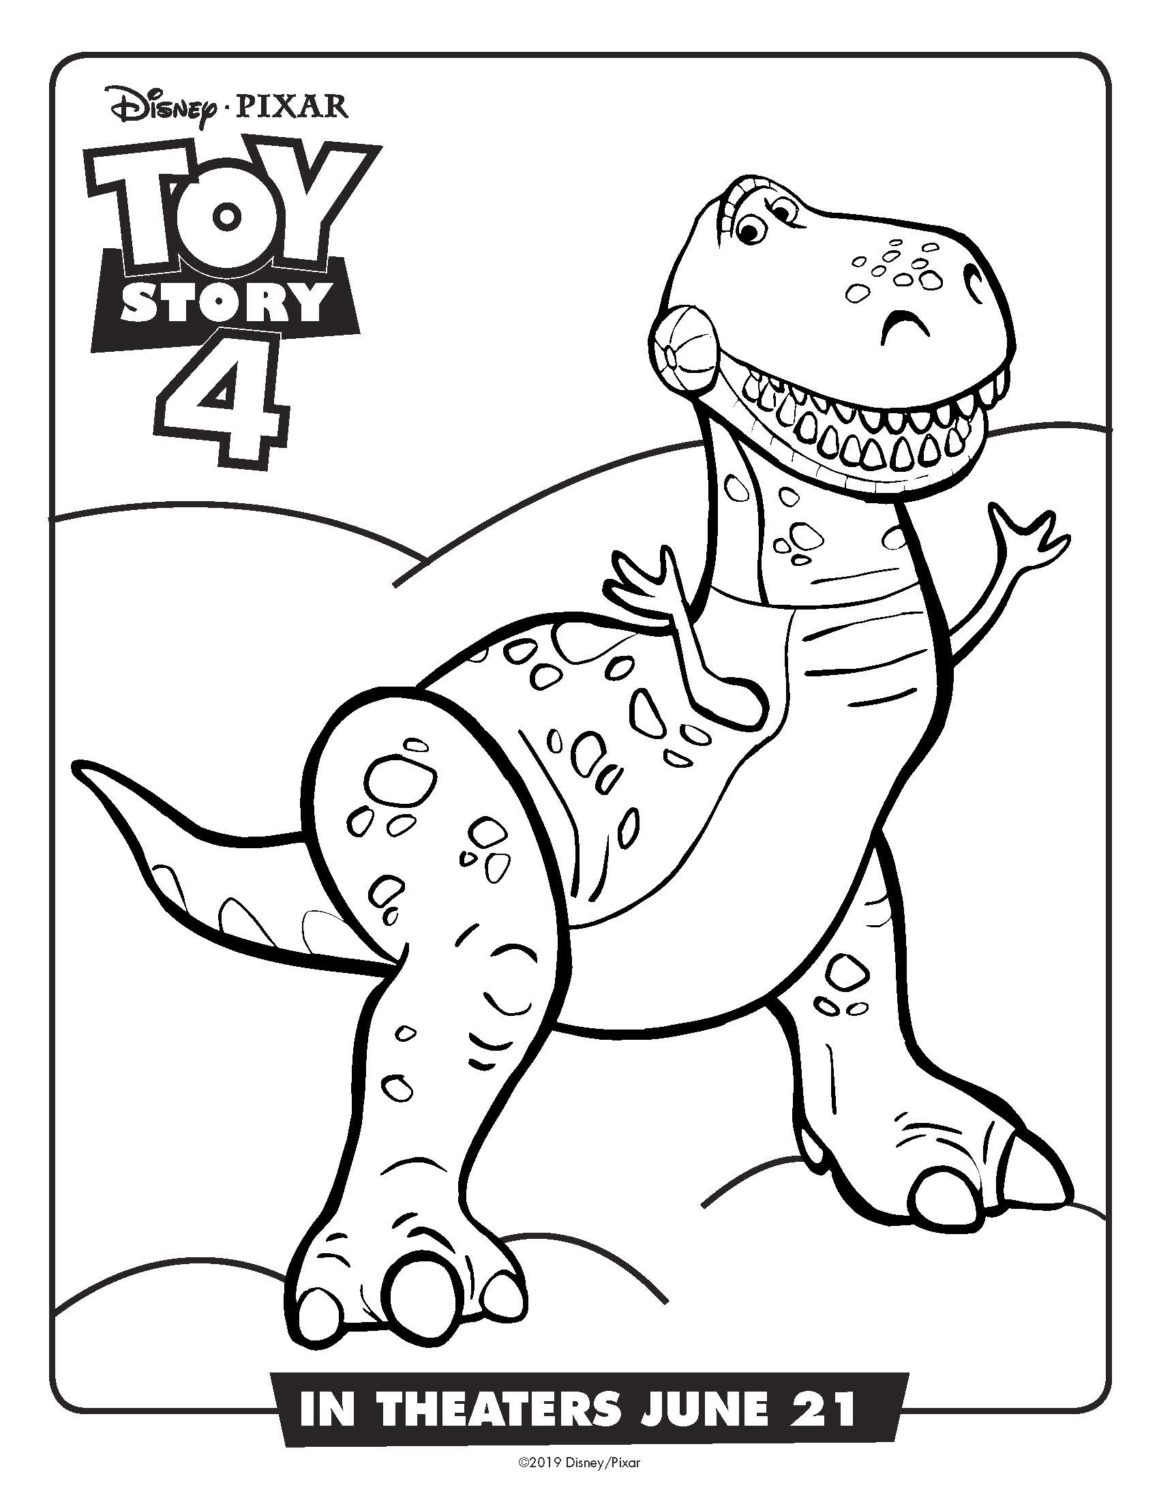 Free Printable Toy Story 4 Coloring Pages and Activity ...